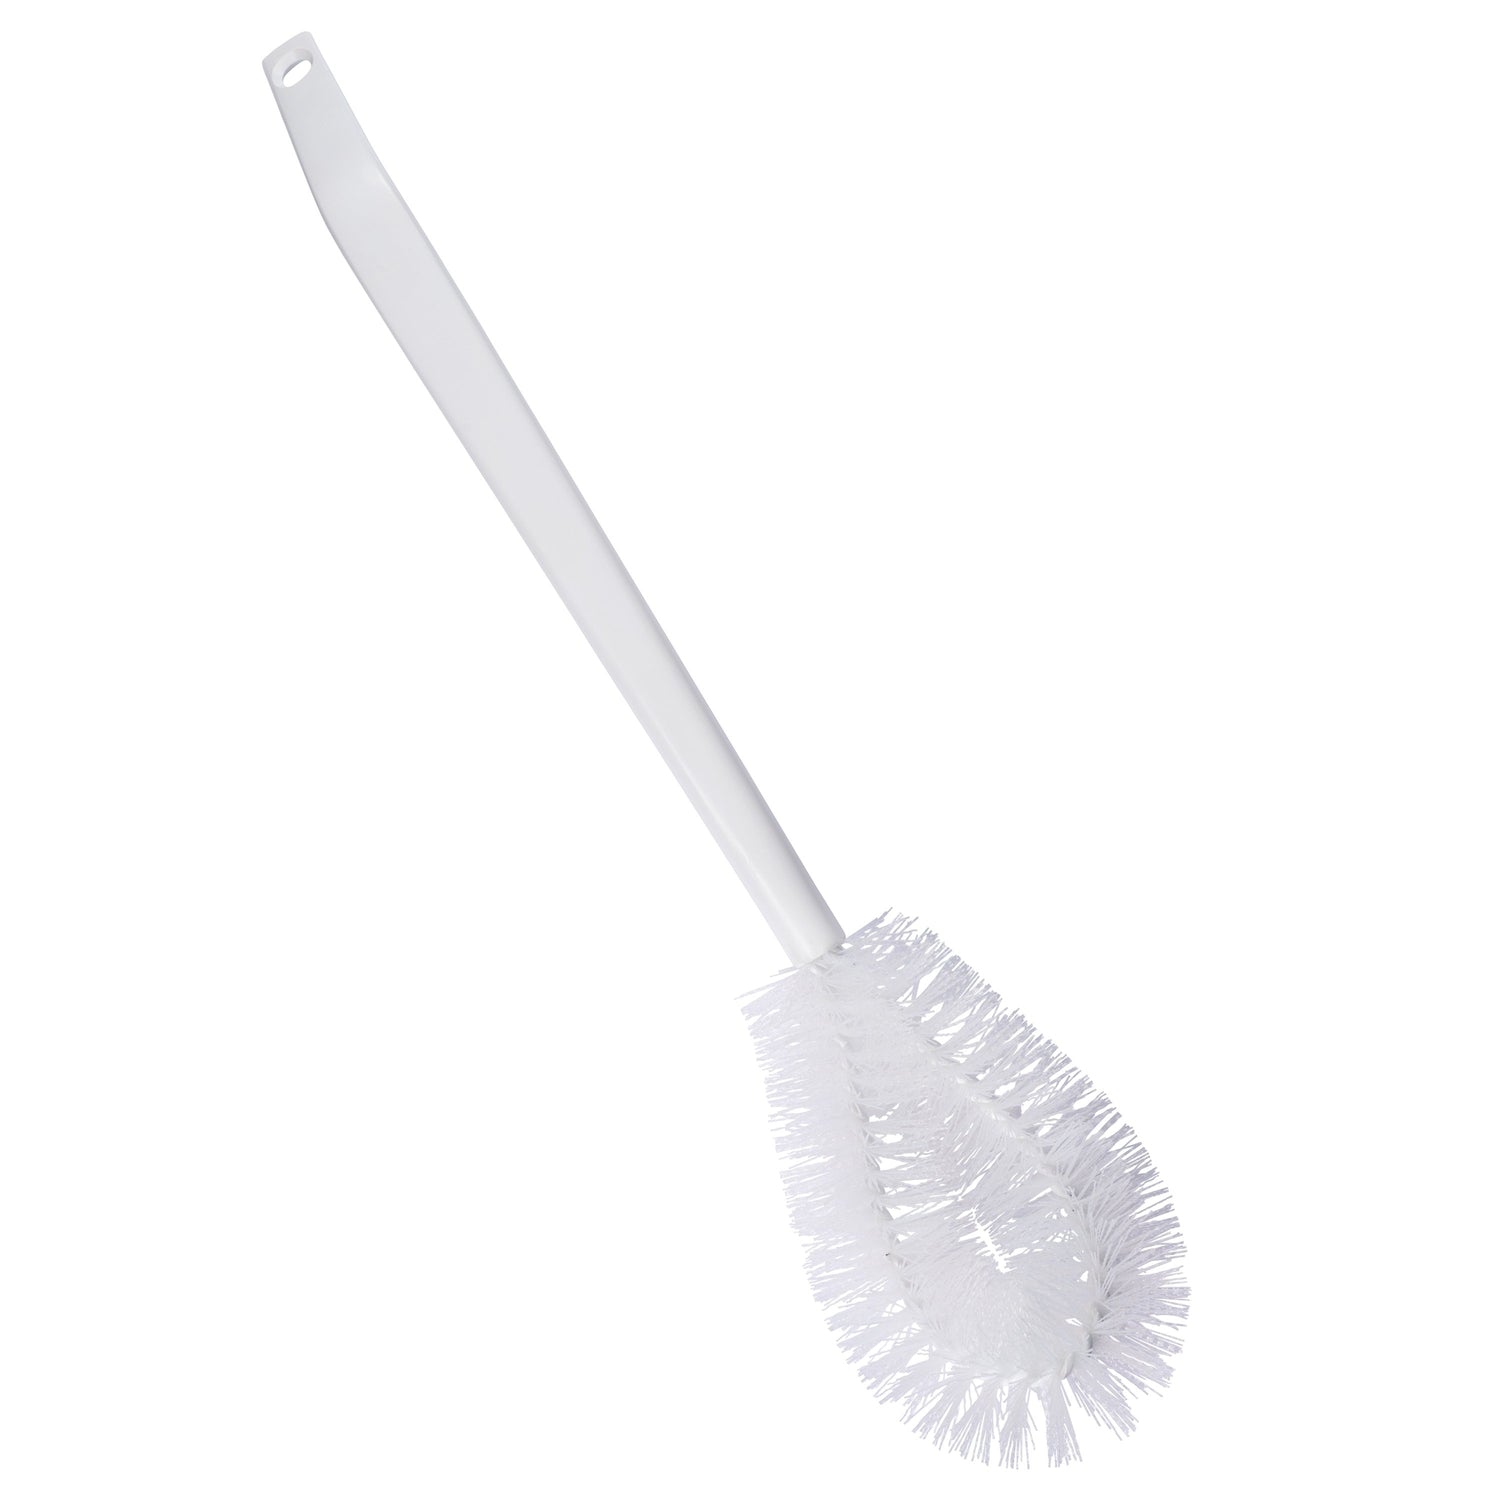 Round Cleaning Brush for Nonstick Surfaces - Fante's Kitchen Shop